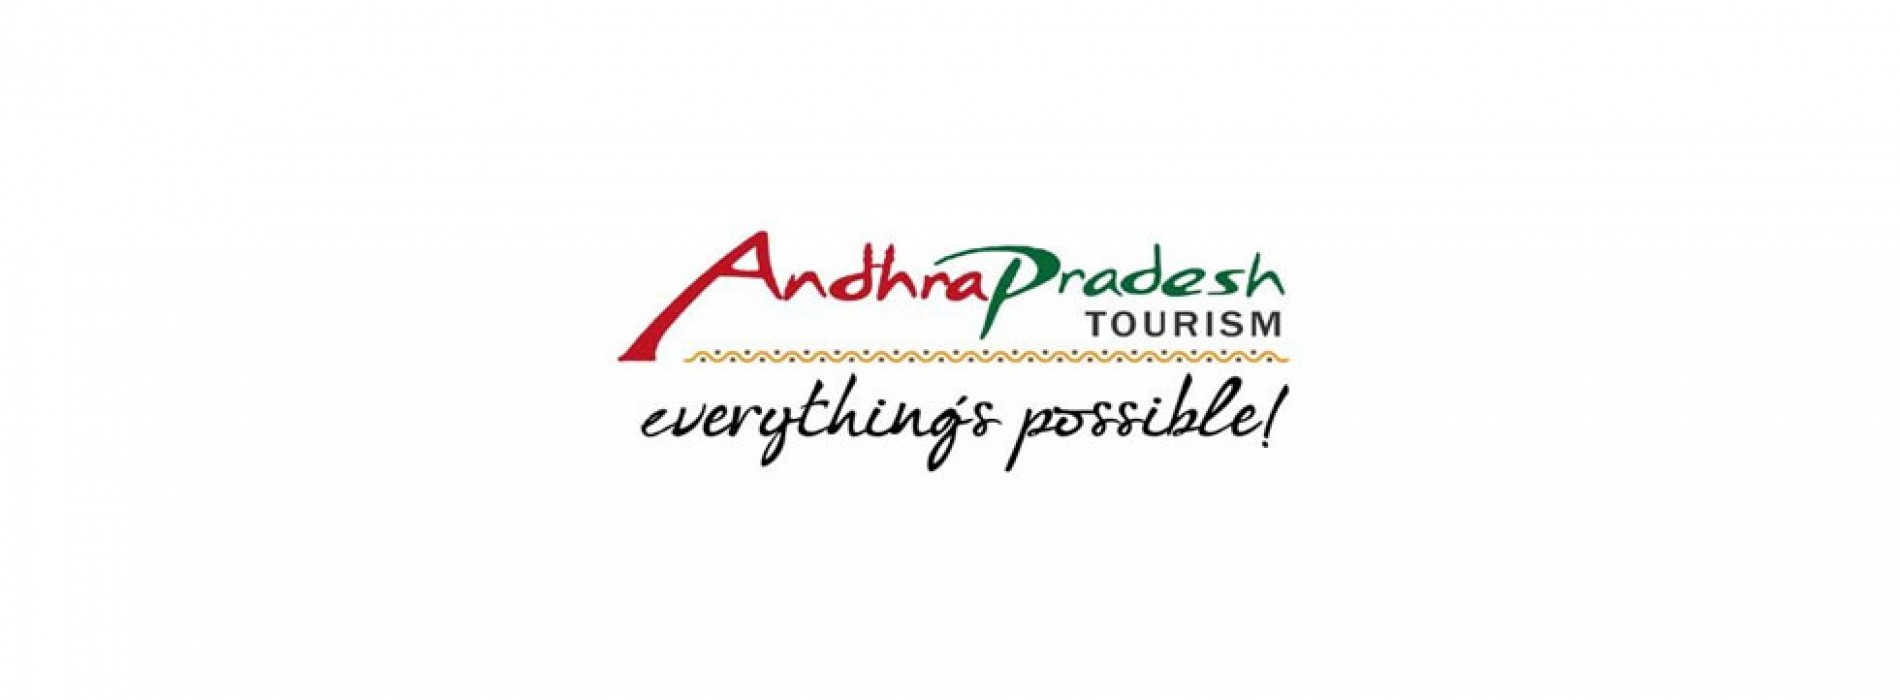 Andhra Pradesh Tourism geared up for the upcoming tourist season